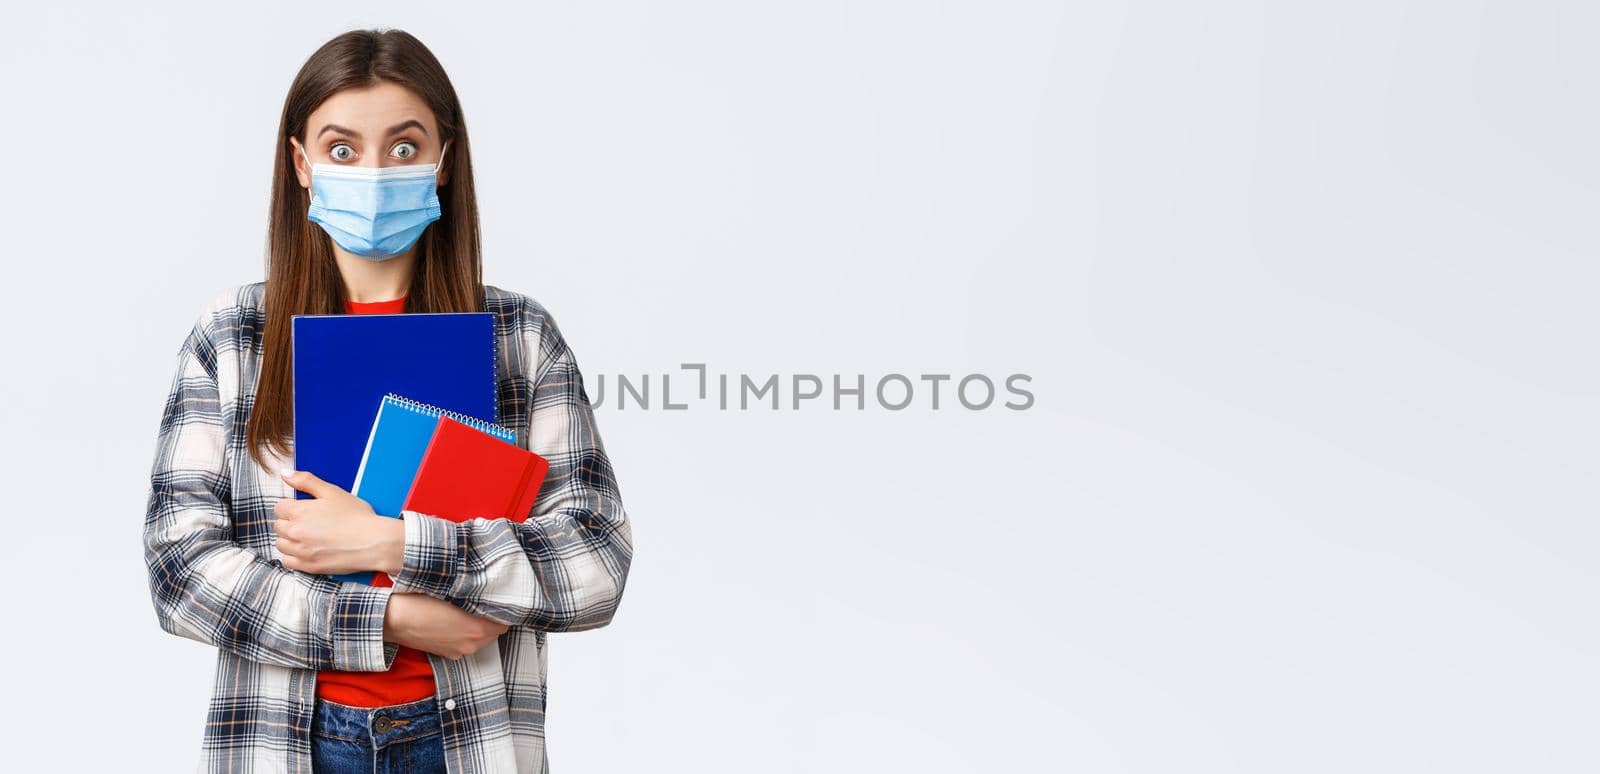 Coronavirus pandemic, covid-19 education, and back to school concept. Surprised female student in medical mask look amazed, widen eyes from big news, carry notebooks, white background.